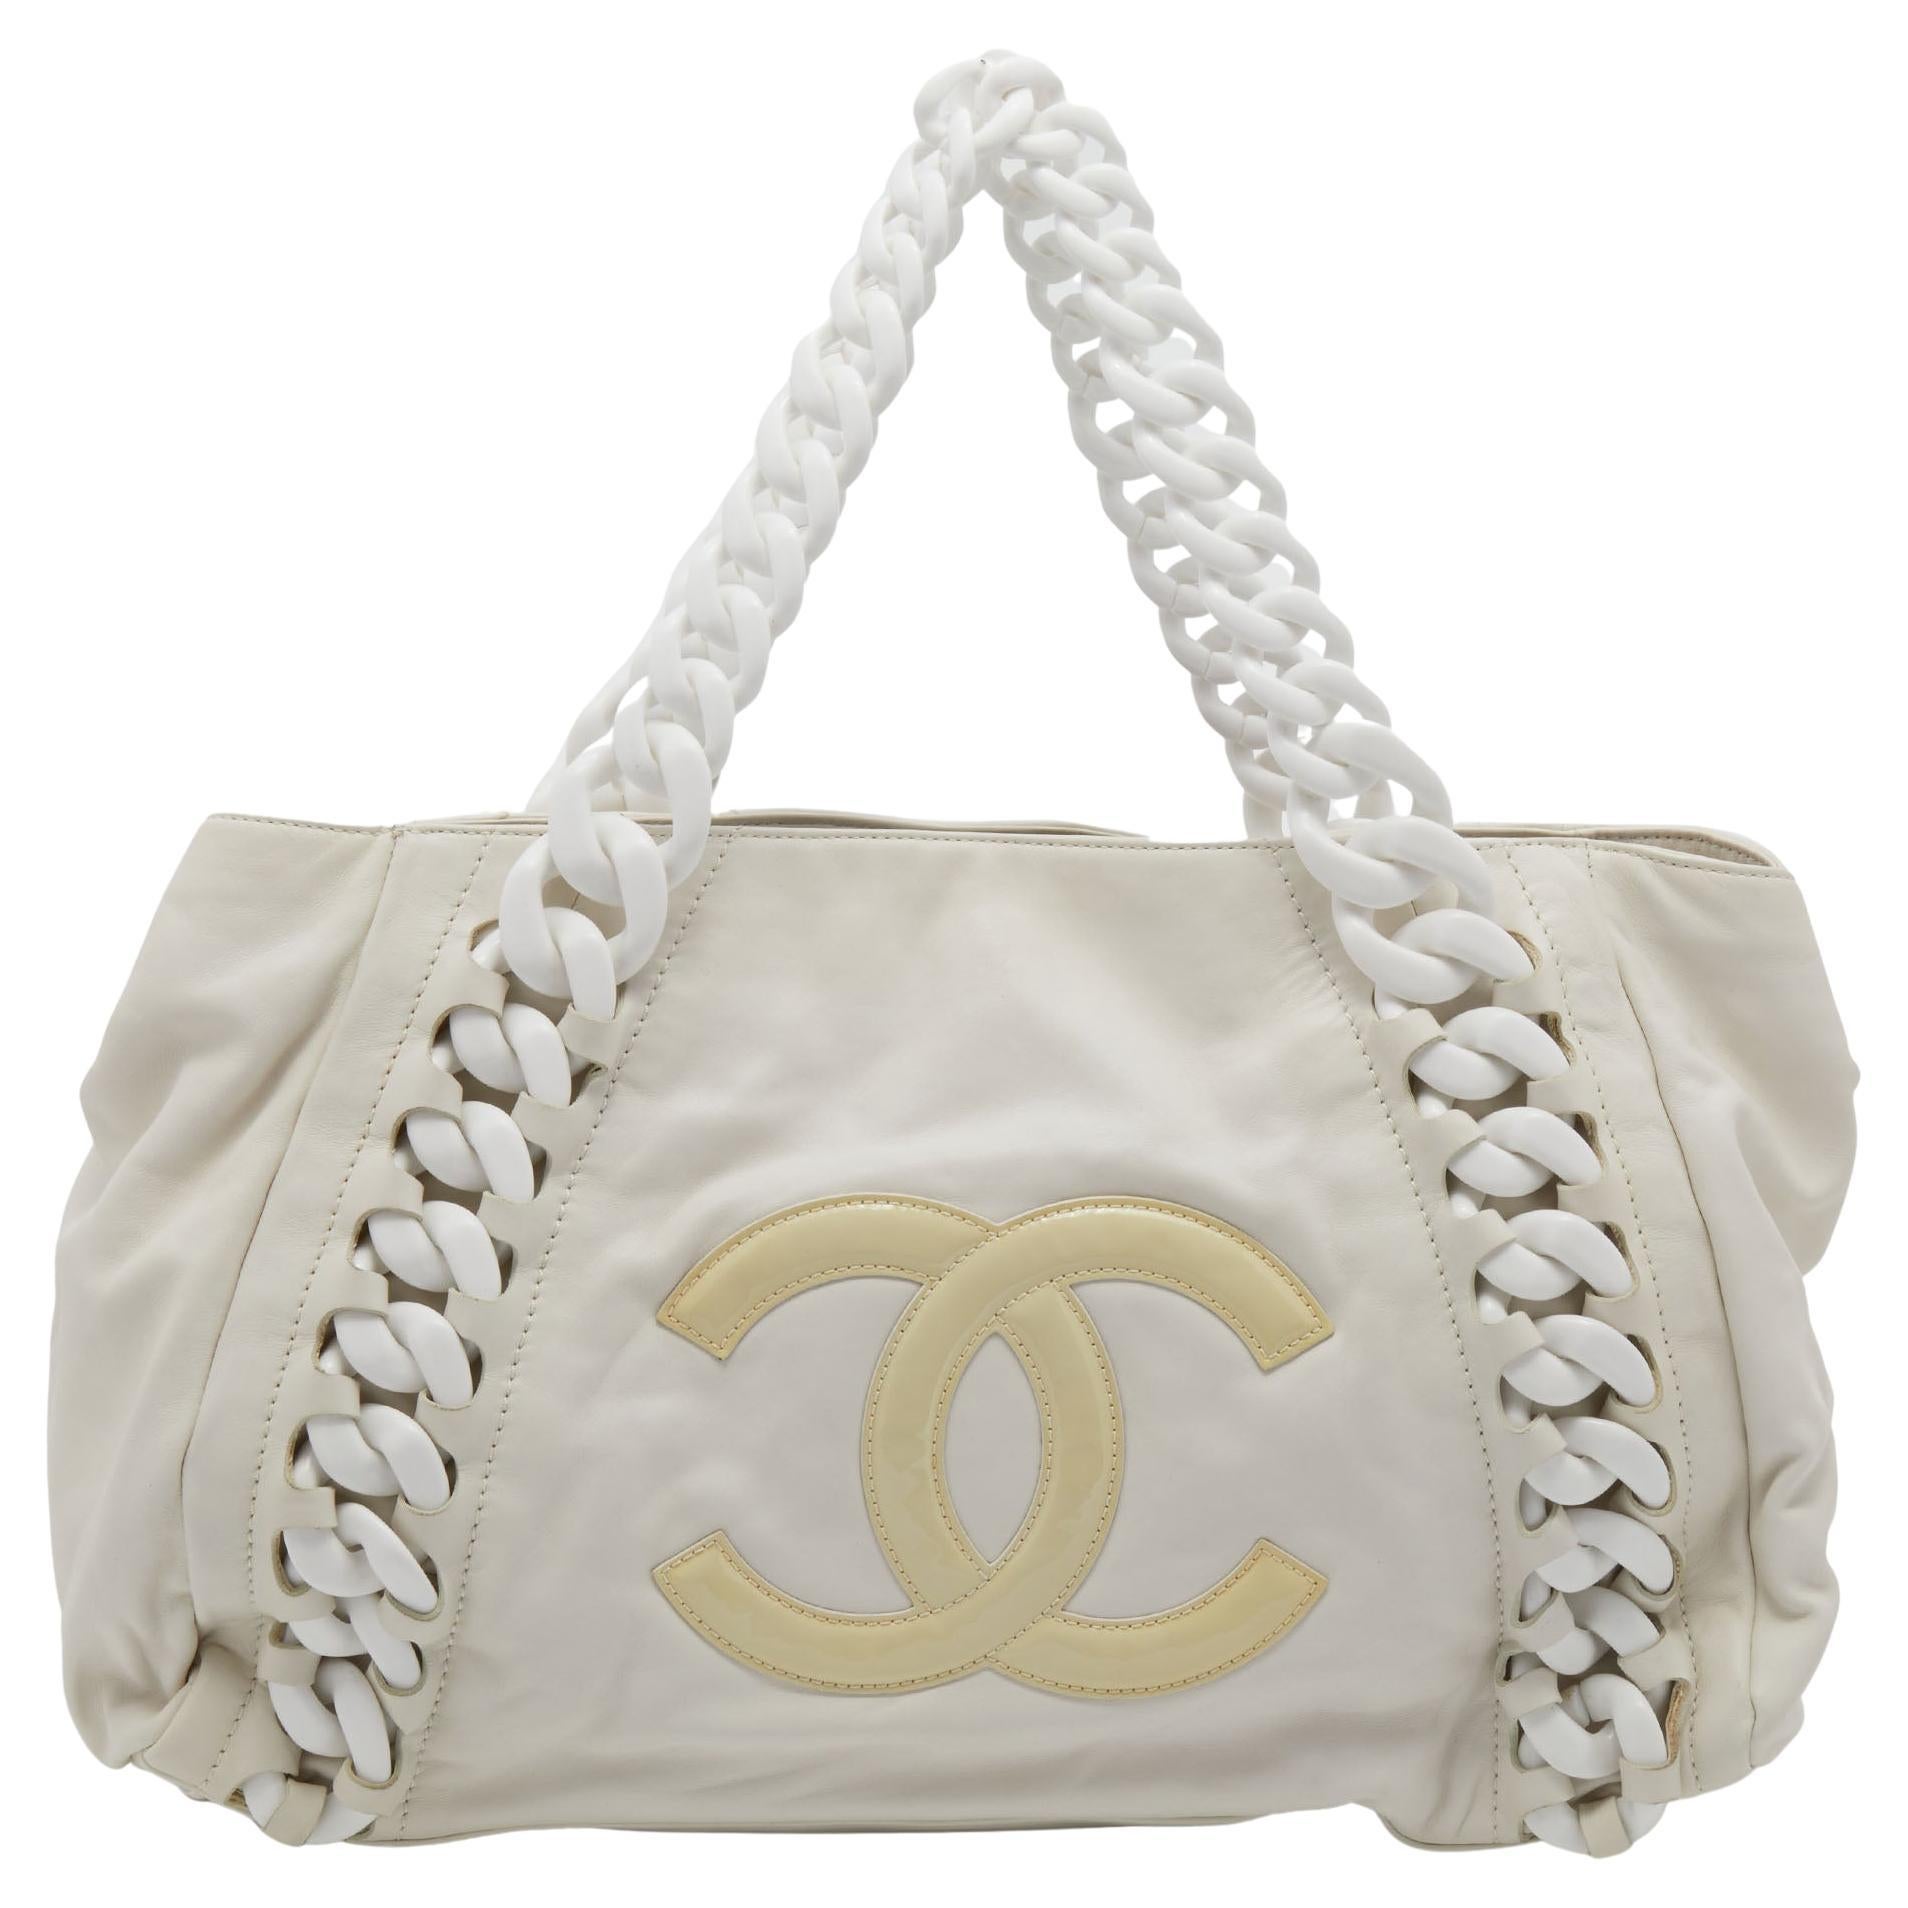 Chanel White Leather Modern Chain Rhodoid East West Tote